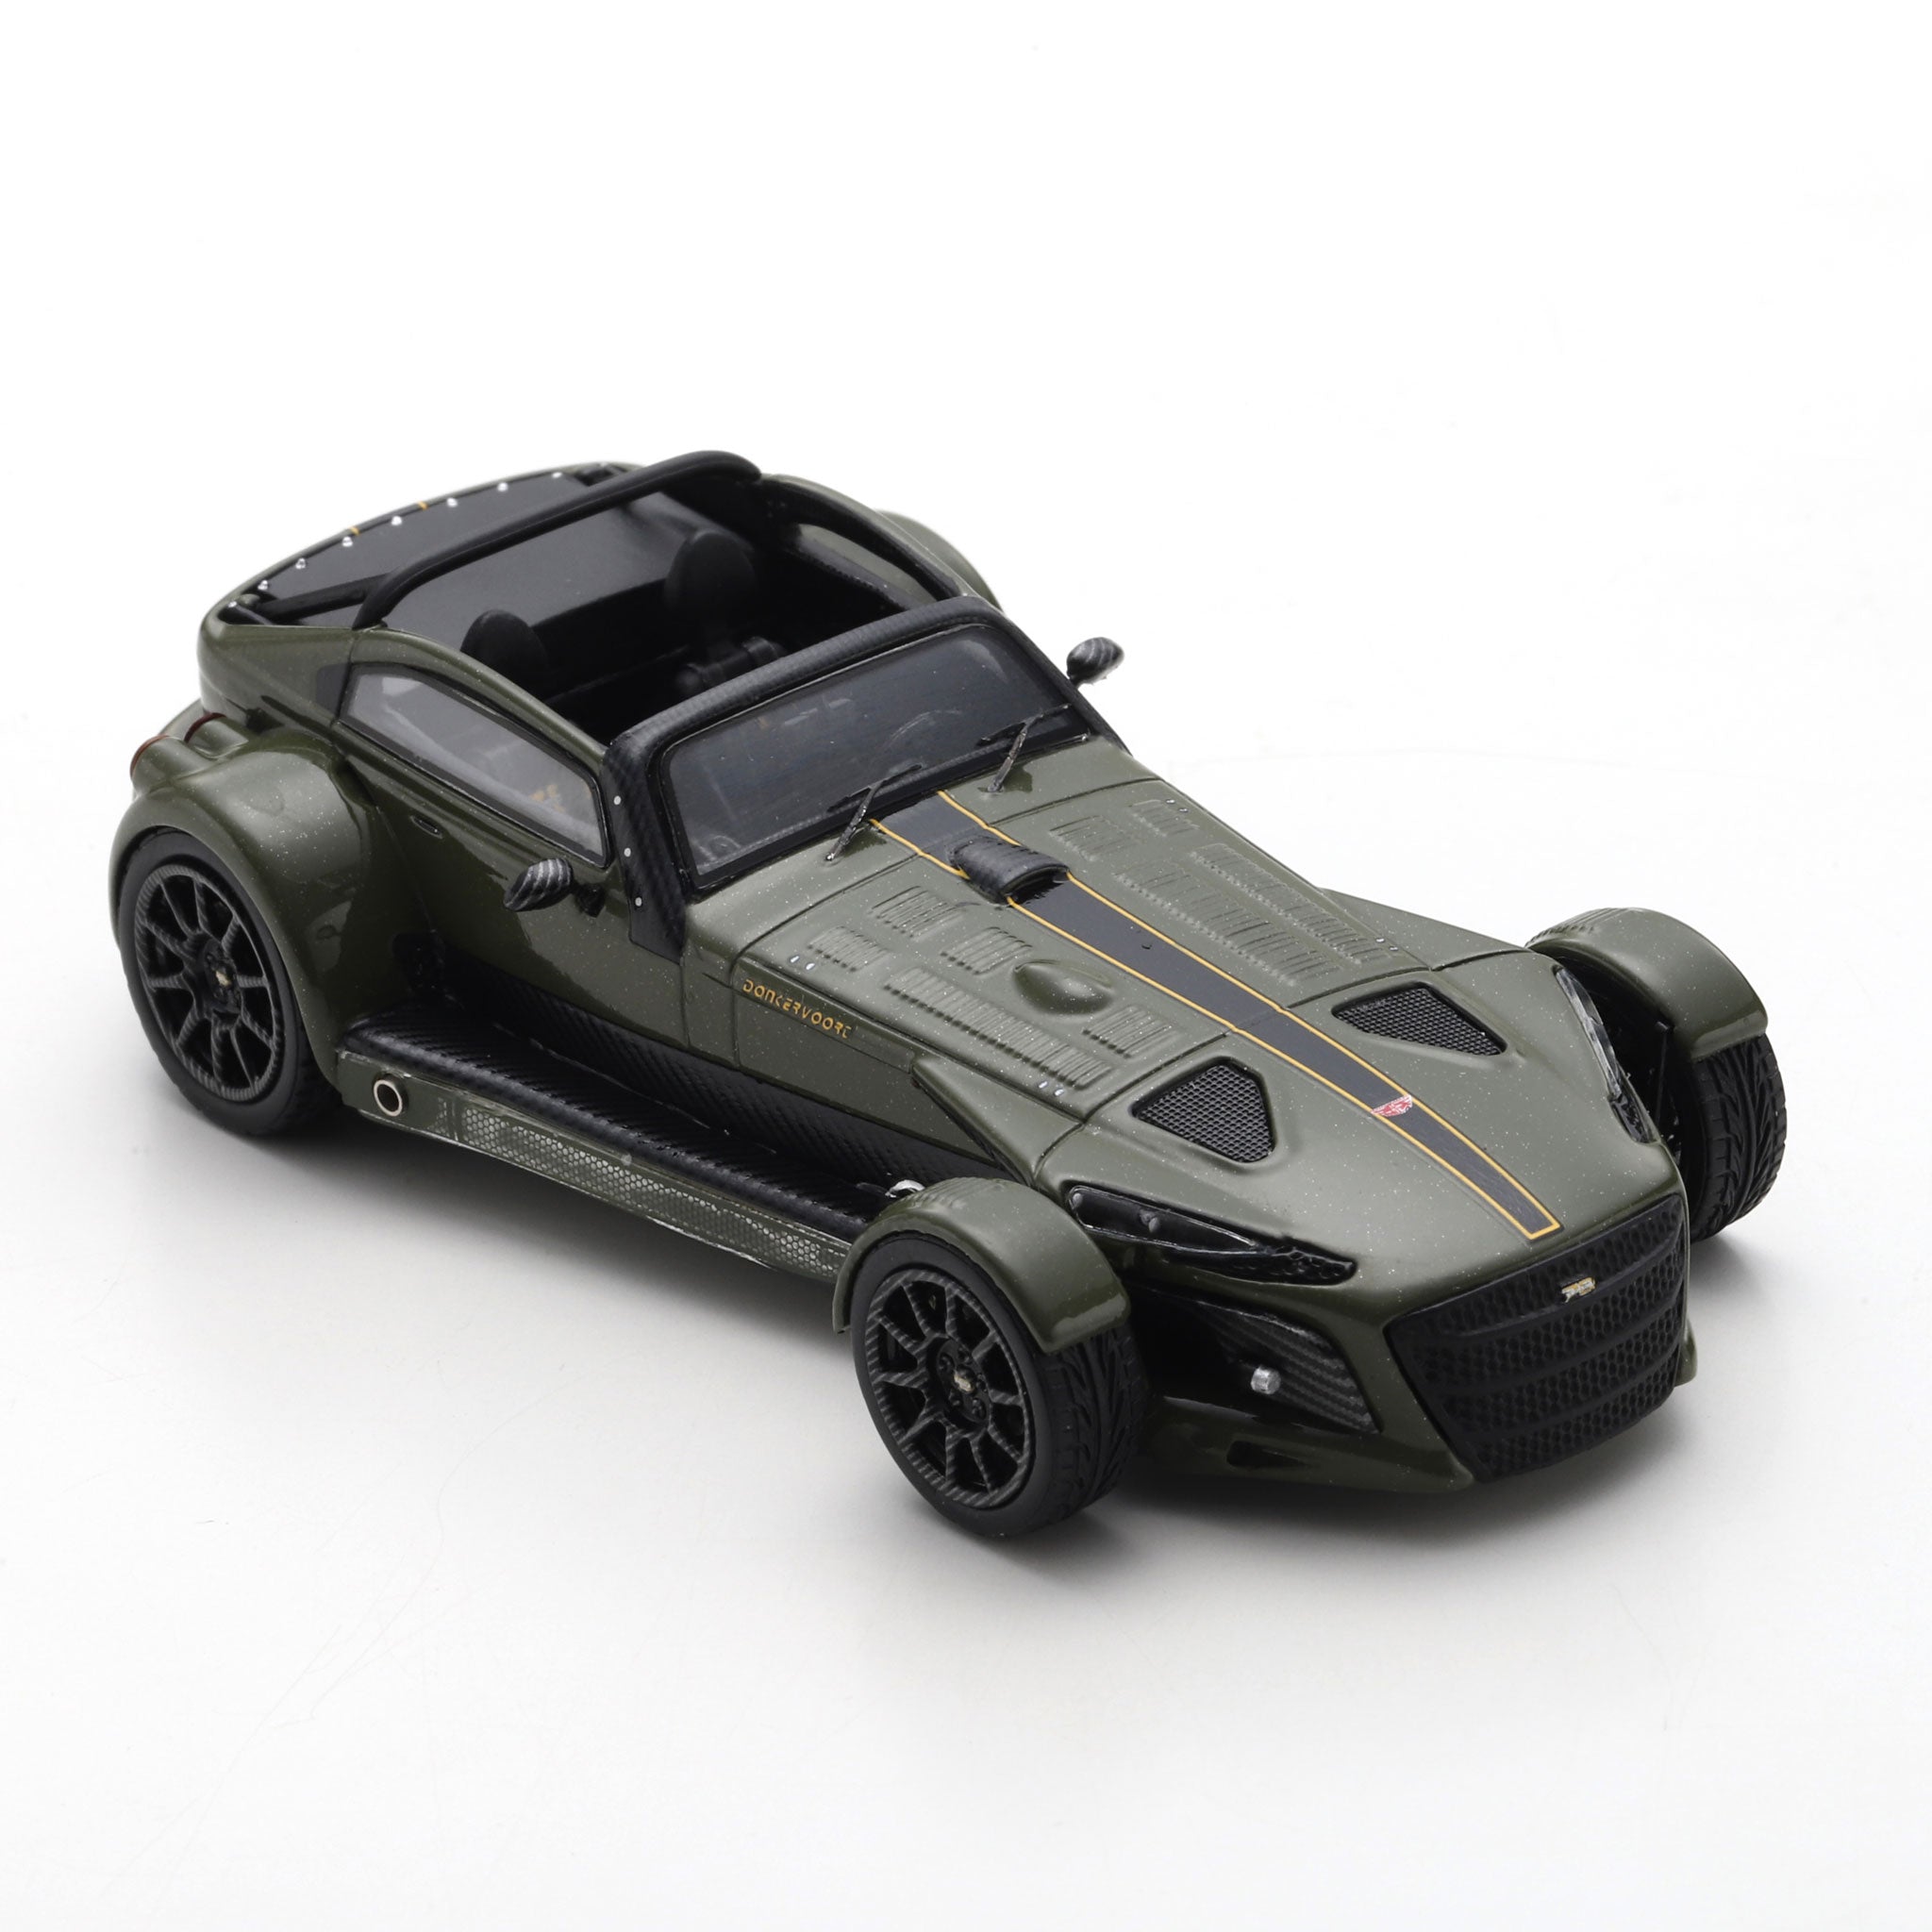 Donkervoort D8 GTO-JD70 1:43 // Green